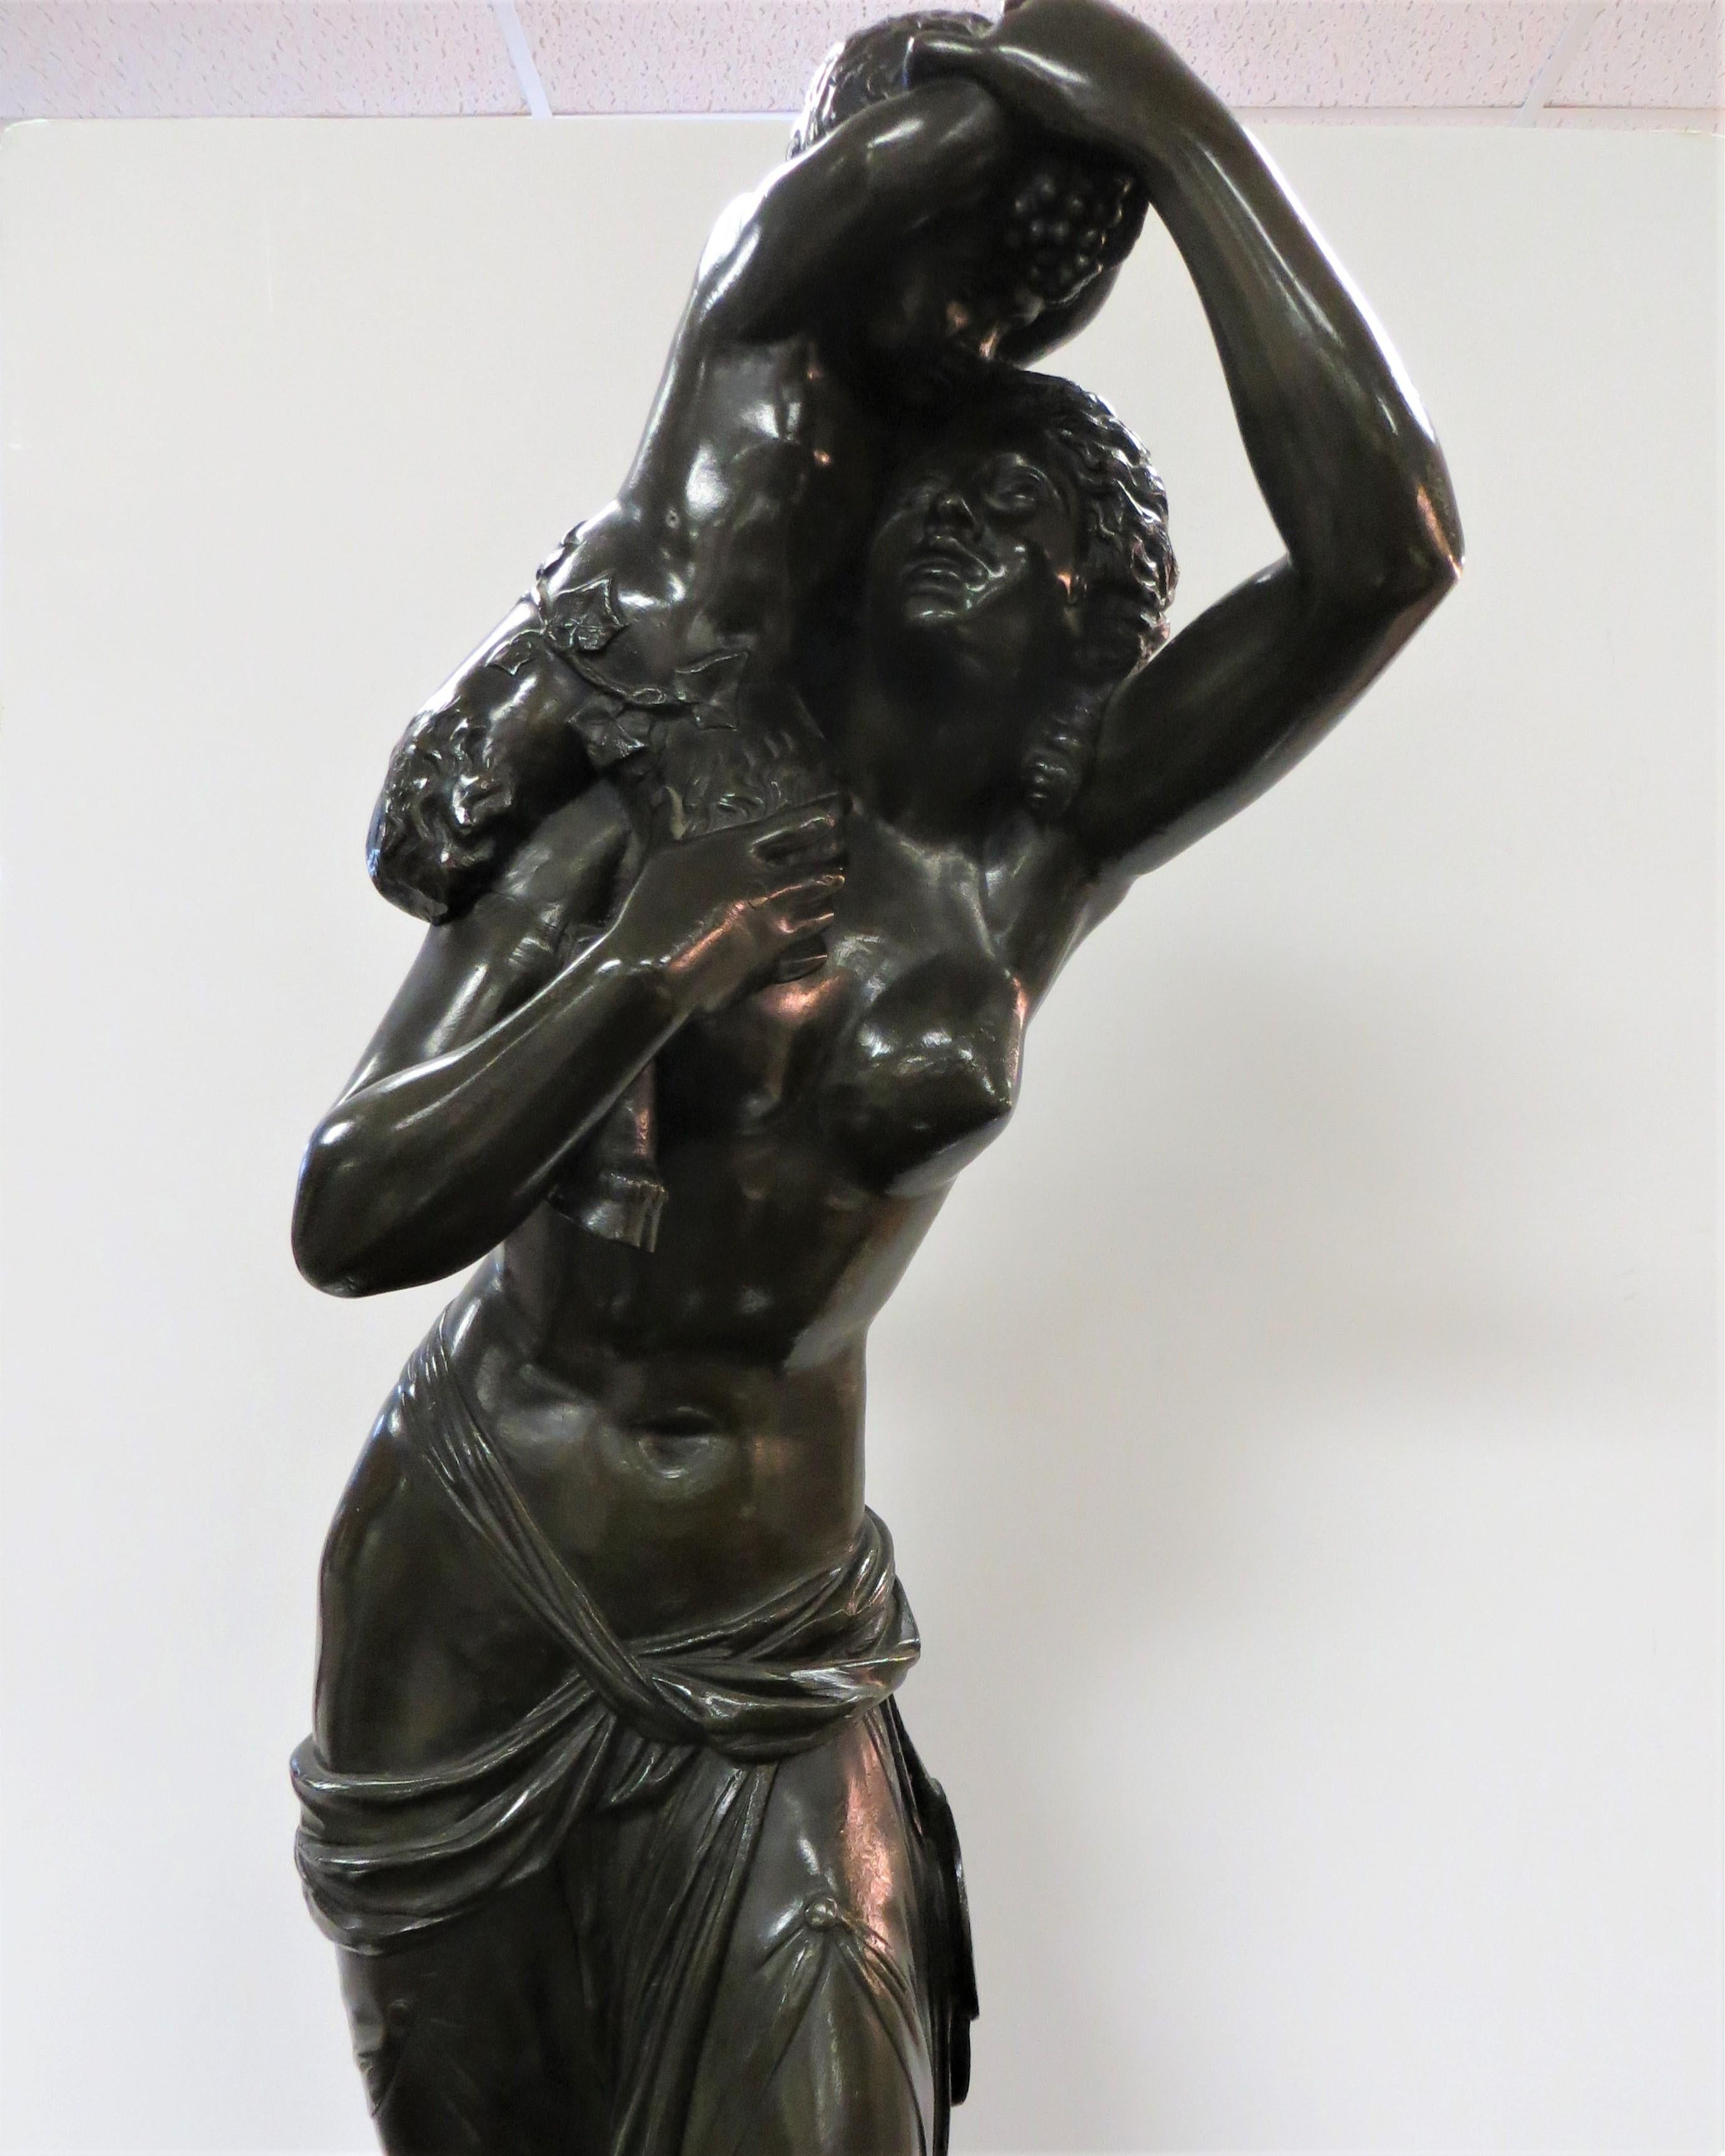 Clodion Michel (1738-1814) : 19th C. sculpture, bronze with medal patina, nude faun woman sitting on a rock and 2 puttis, signed on the back cast by Vittoz
Claude Michel Clodion was a French Rococo sculptor. Noted for his versatility as an artist